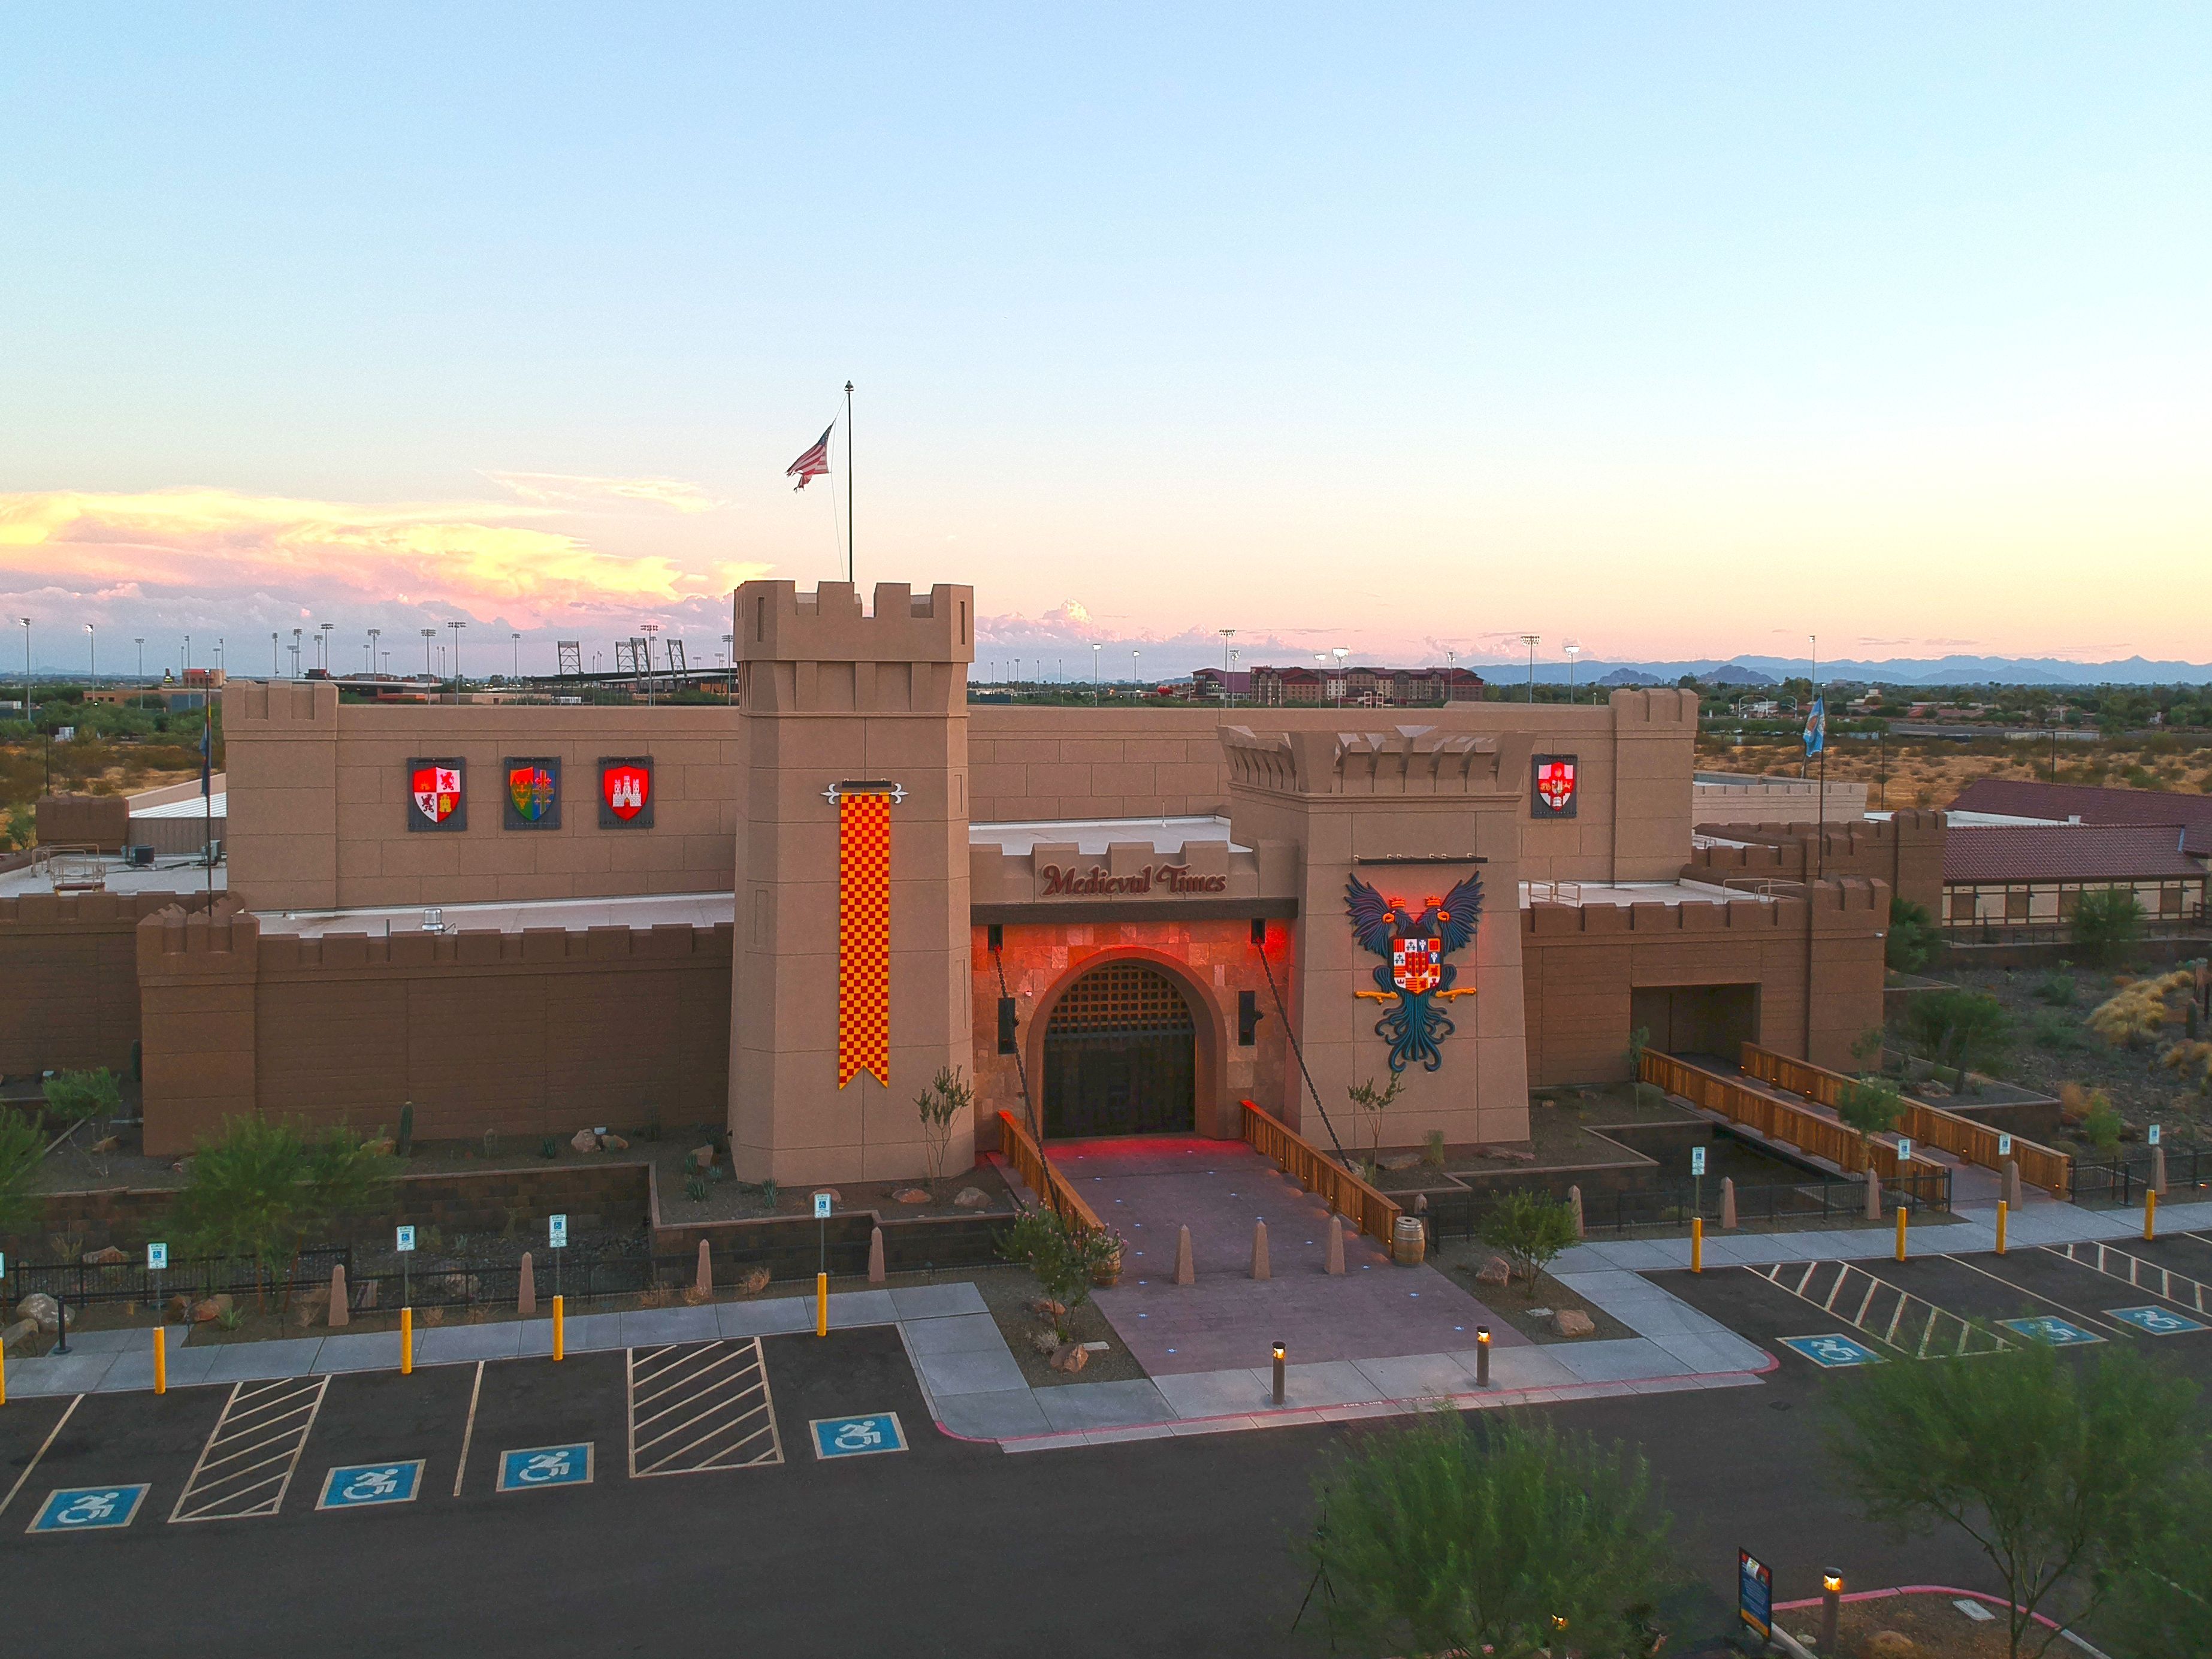 Medieval Times Dinner & Tournament opening this summer in Scottsdale